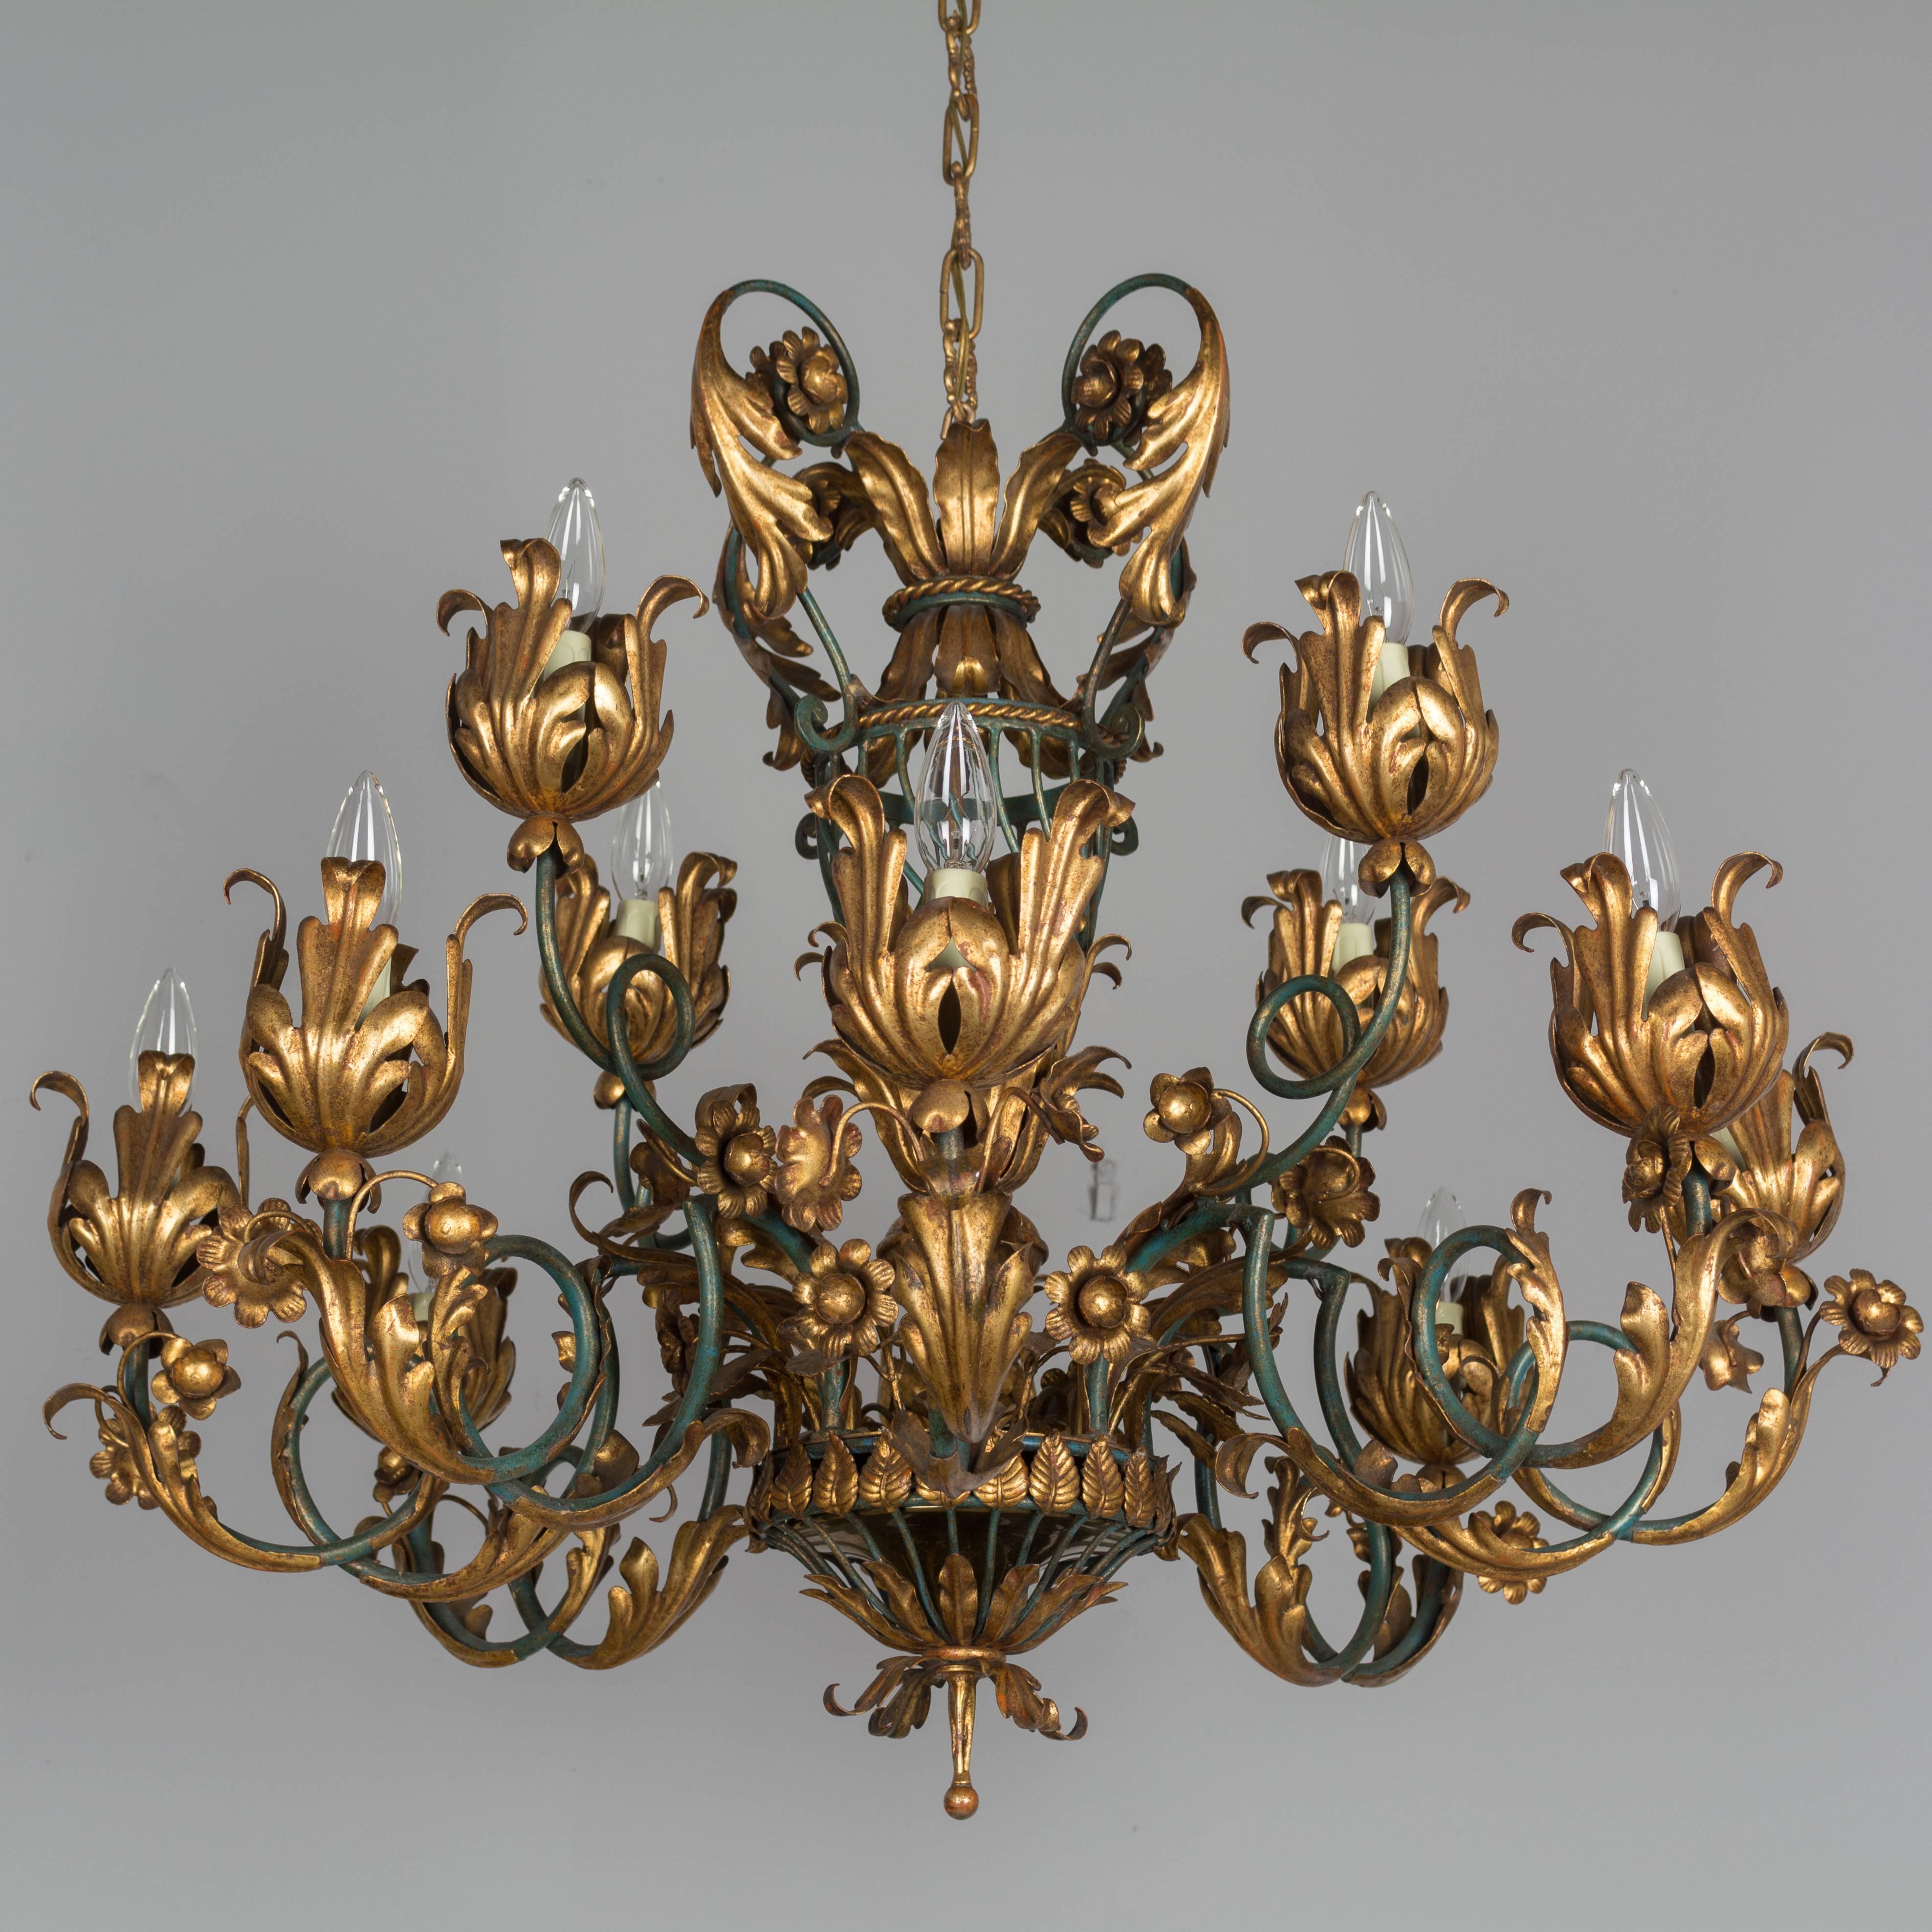 A French 1940s parcel-gilt twelve-light wrought iron chandelier. Elaborately detailed, with large gilded tole acanthus leaves and rosebuds. Rewired and shown with 25 watt torpedo bulbs (not included). Ground wire will be need it to install. 